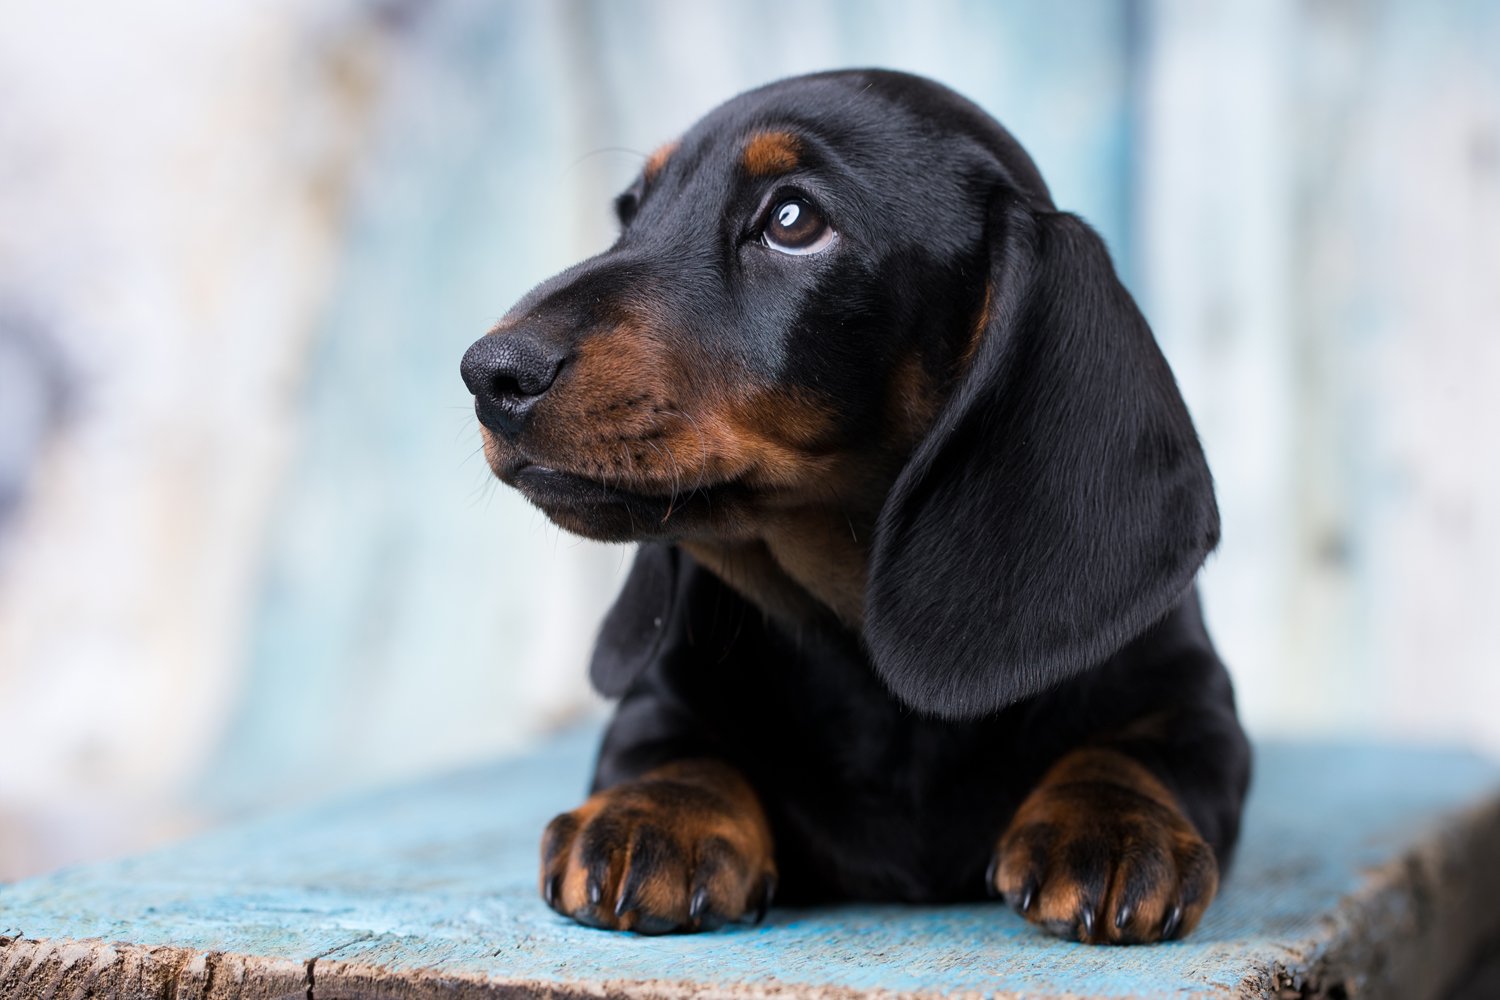 Are Dachshunds Easy to Train? I Love Dachshunds